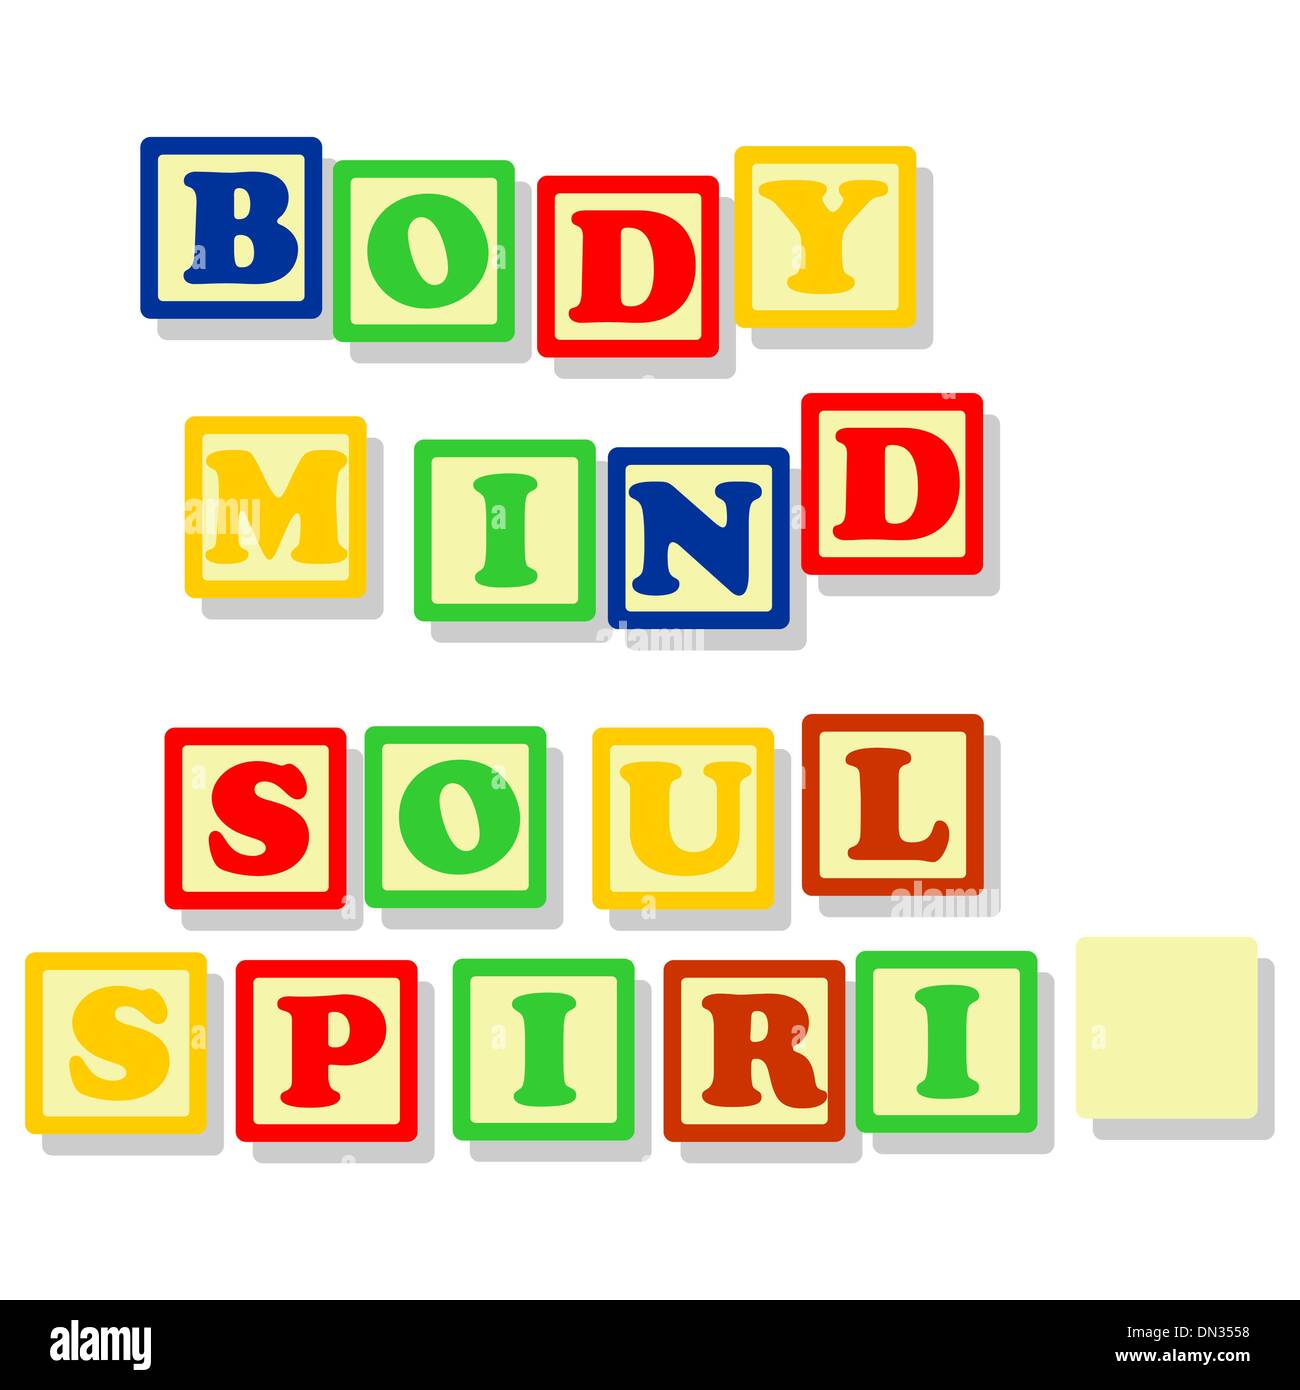 Body mind soul and spirit in color block Stock Vector